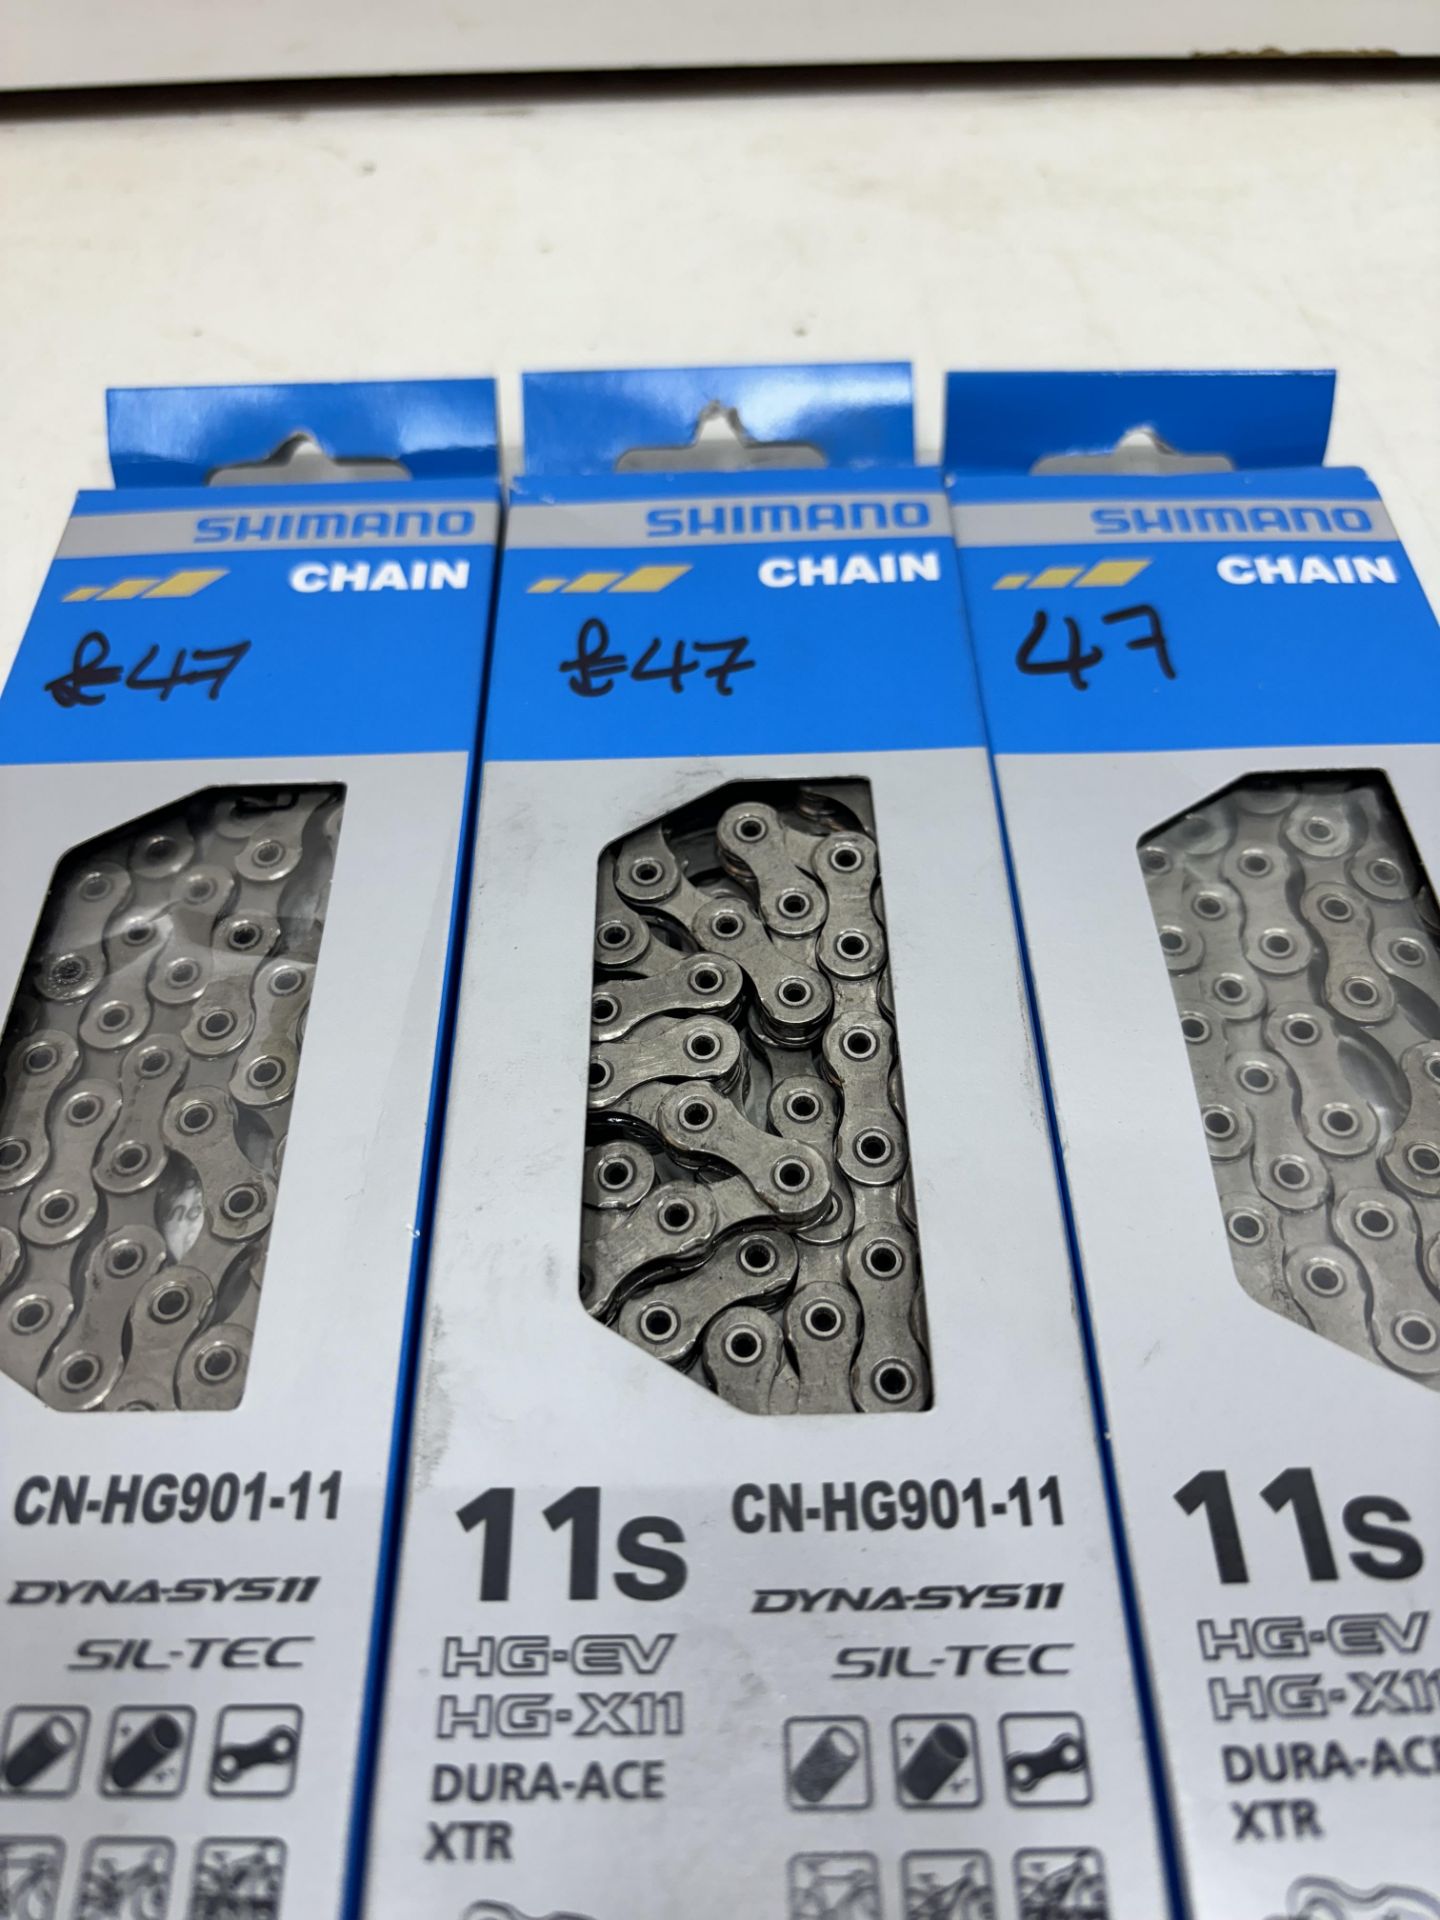 3 x Shimano CN-HG901-11 SIL-TEC 11 Speed Chains, 116 Links - Image 3 of 4